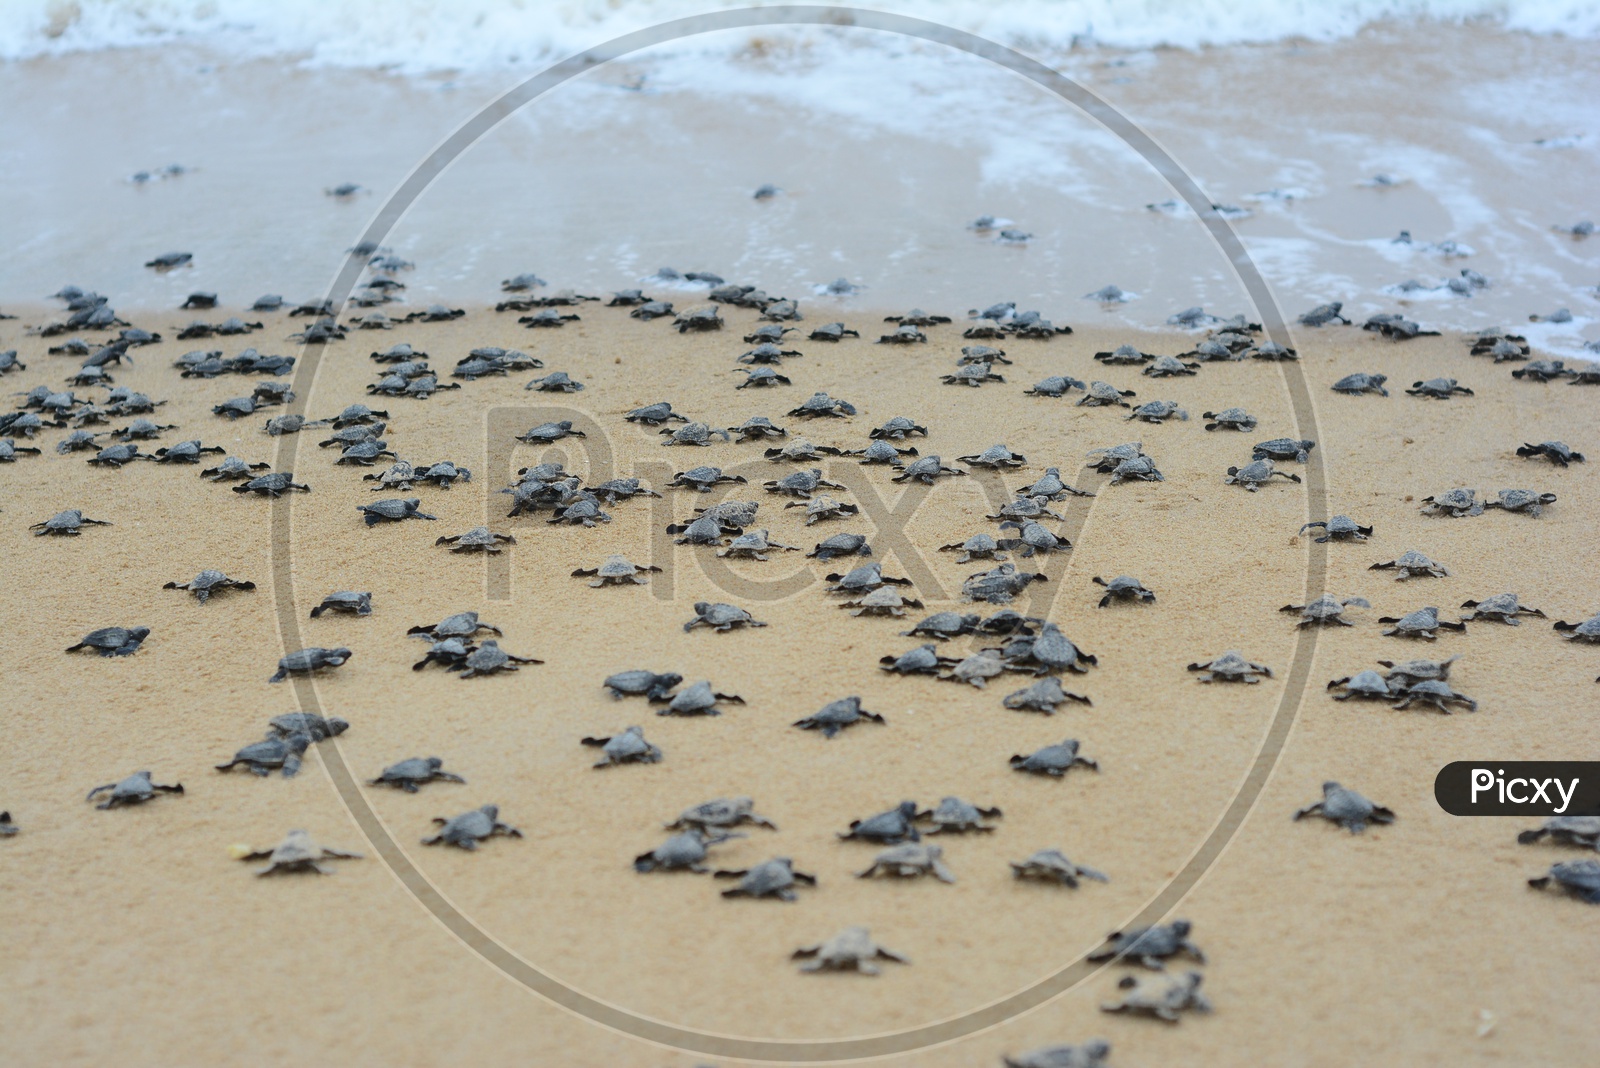 Baby Olive Ridley Turtles